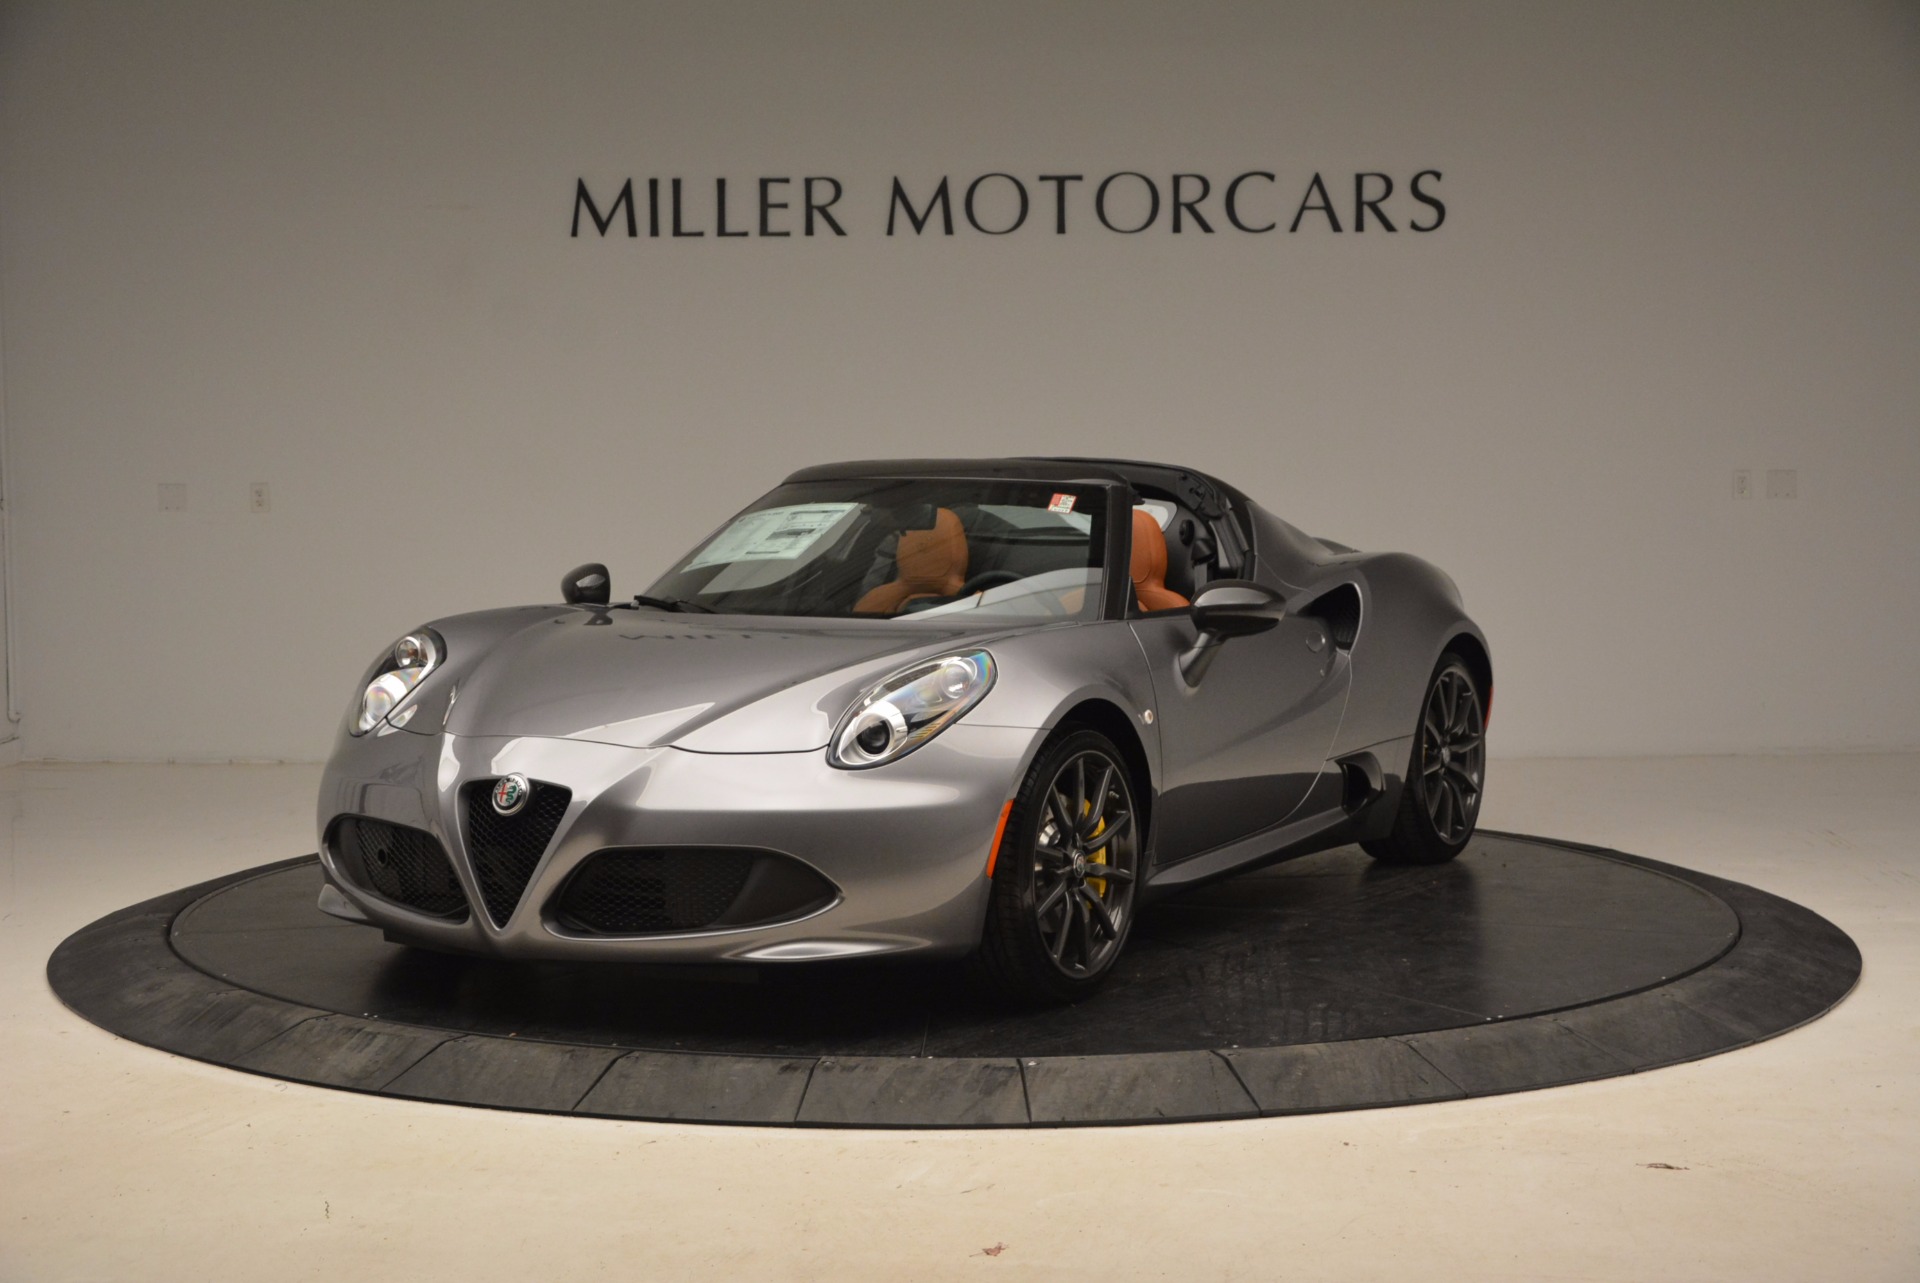 New 2018 Alfa Romeo 4C Spider for sale Sold at Bentley Greenwich in Greenwich CT 06830 1